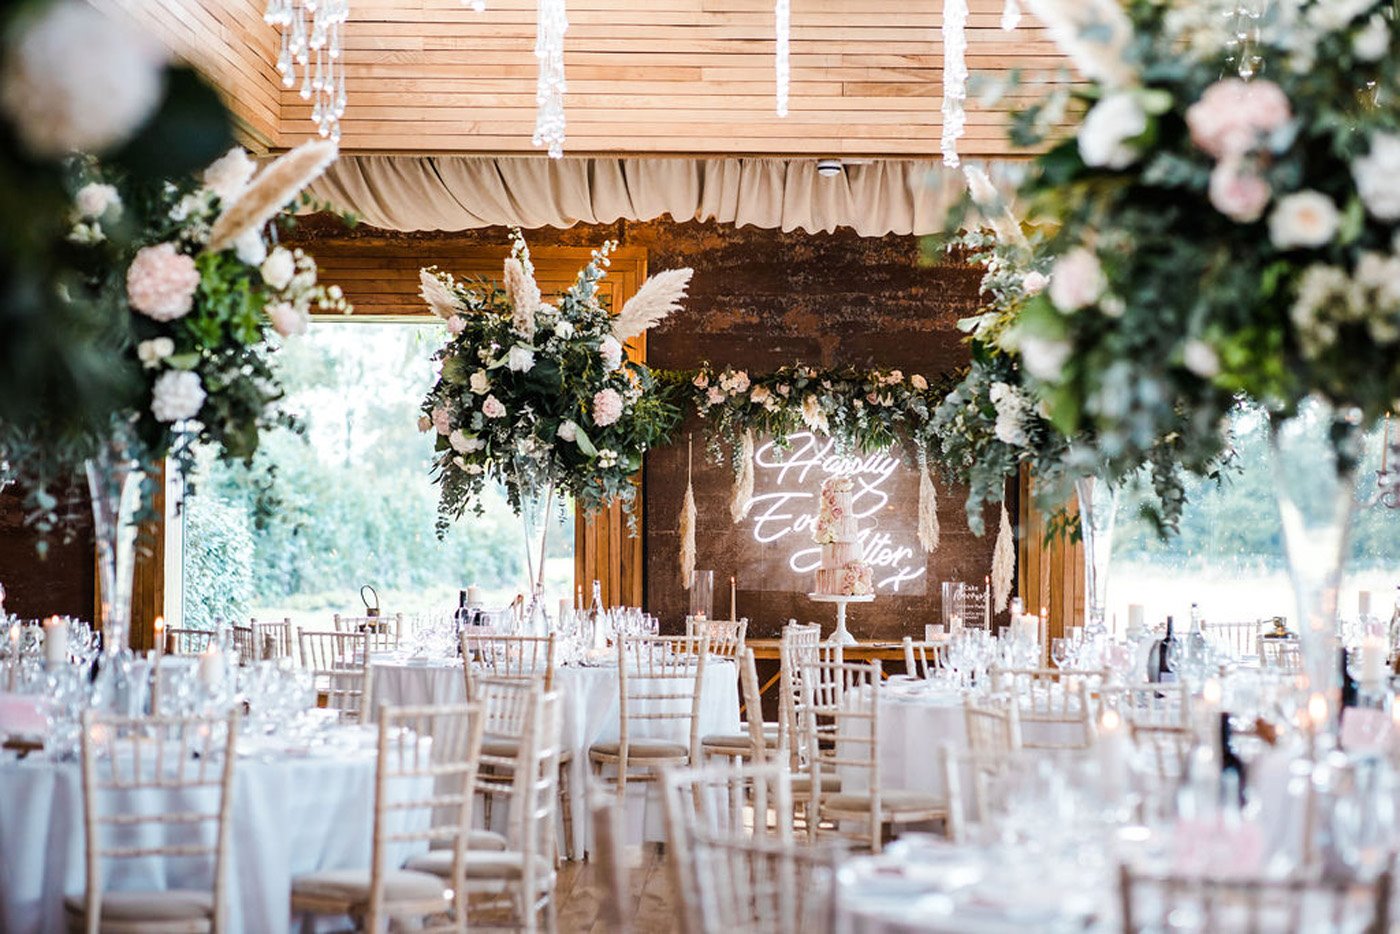 Pretty pink and greenery wedding reception with round tables and foliage pampas grass floral arrangements, neon sign back lighting the cake table